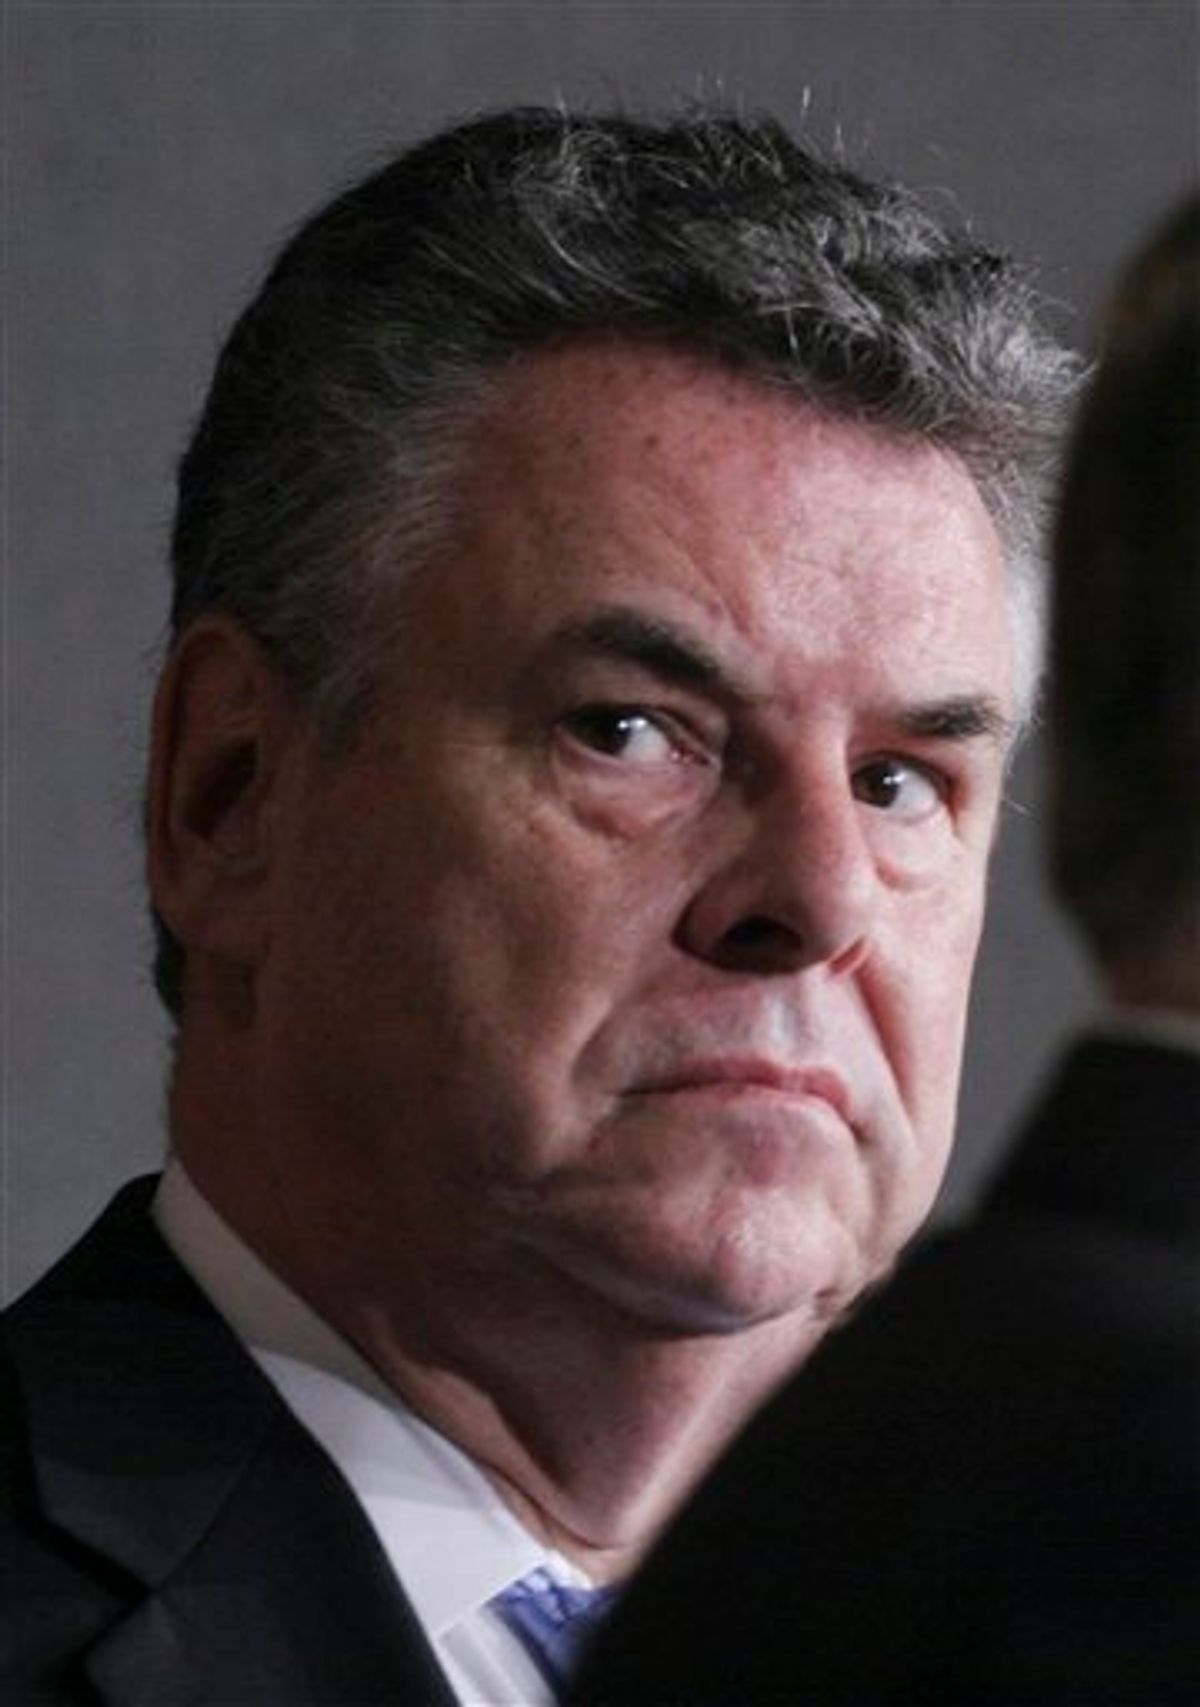 In this June, 2007 file photo, Rep. Peter King, R-N.Y., left, listens during a news conference on Capitol Hill in Washington. The wreckage of the World Trade Center still smoldered when George W. Bush rose to demand that American Muslims not be blamed or mistreated. "Islam is peace," the president declared. But a decade later, doubts and suspicions persist. New York Rep. Peter King is provocatively forcing the issue with congressional hearings, starting Thursday. (AP Photo/Lauren Victoria Burke)         (AP)